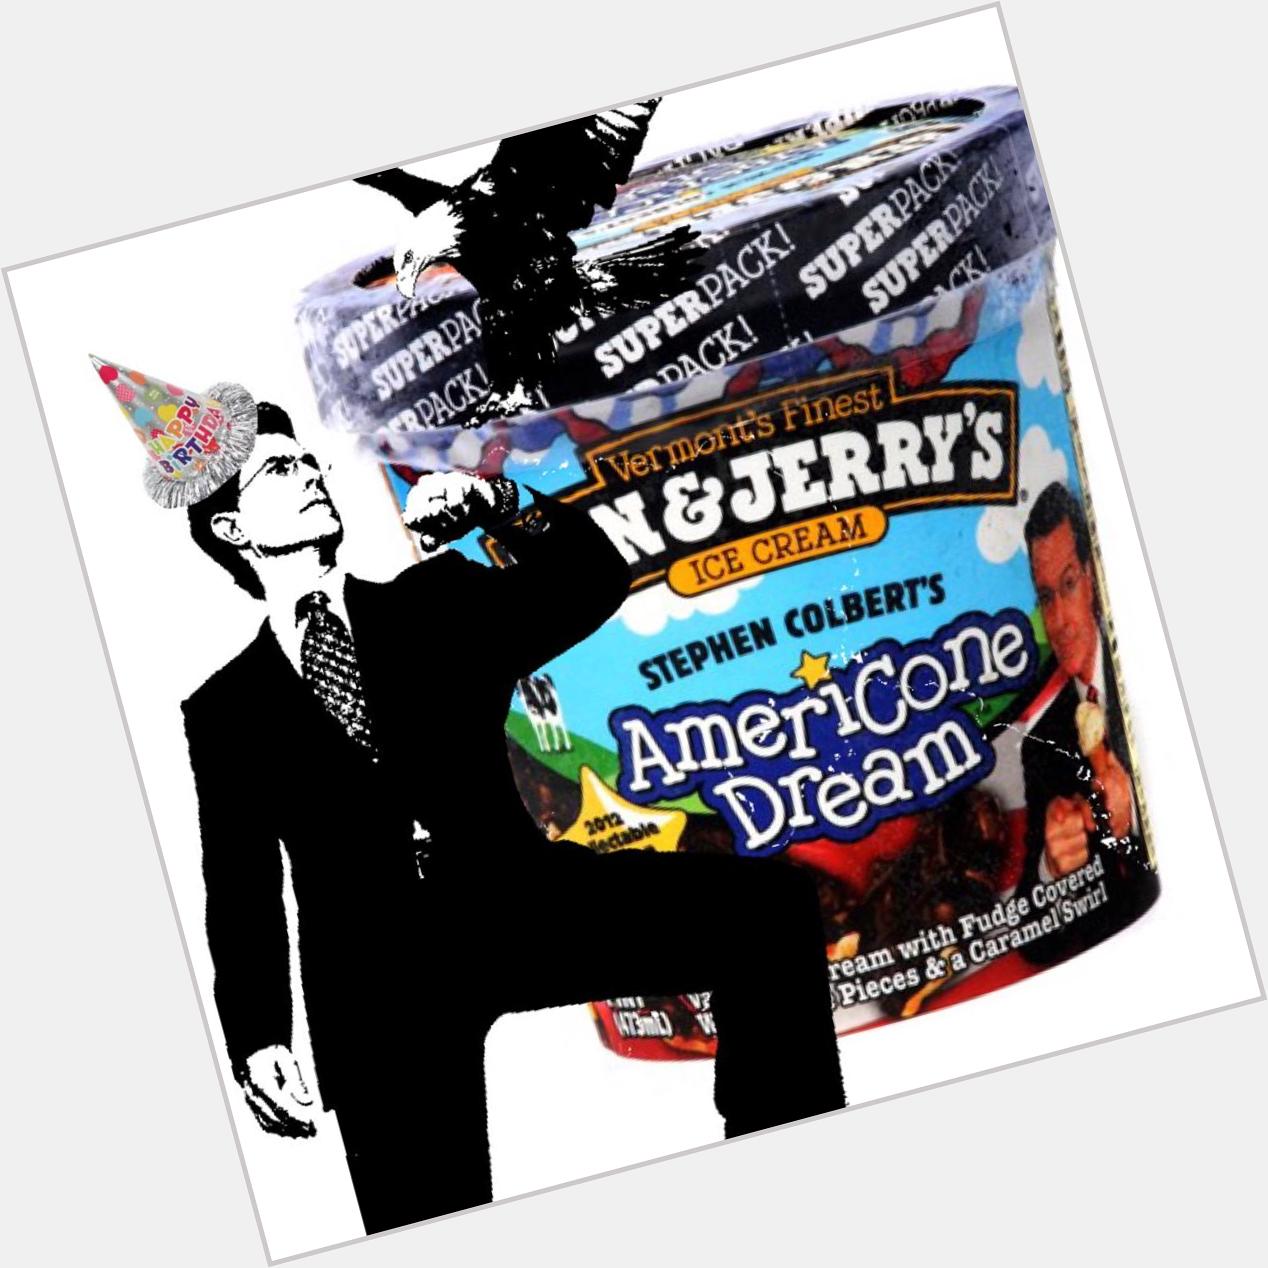 Happy birthday Stephen Colbert, thanks for making the news less awful and creating a delicious Ben&Jerry\s ice cream 